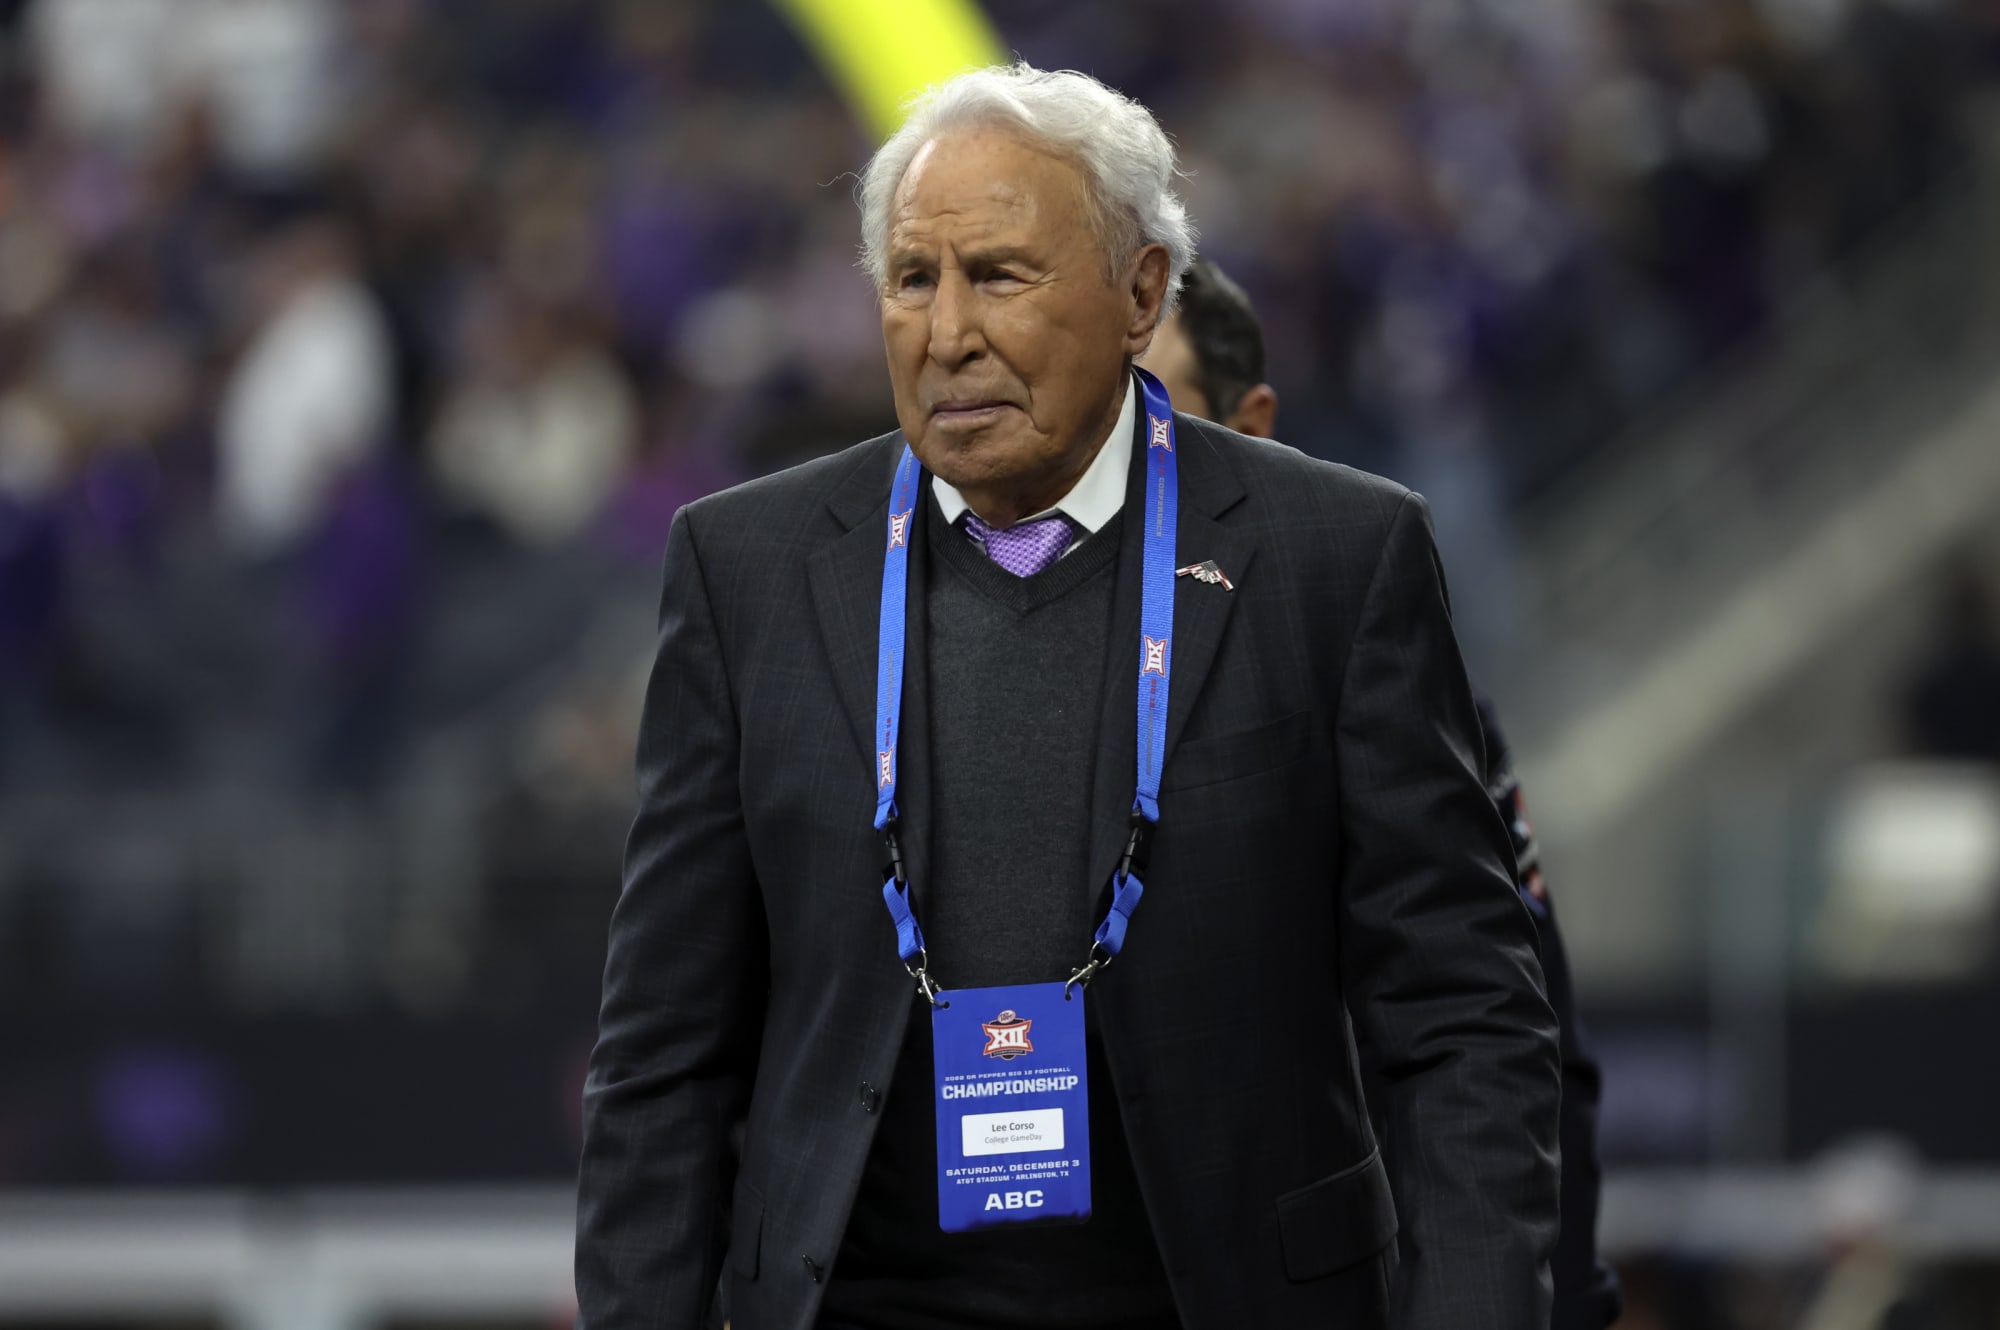 Lee Corso makes shocking headgear pick for National